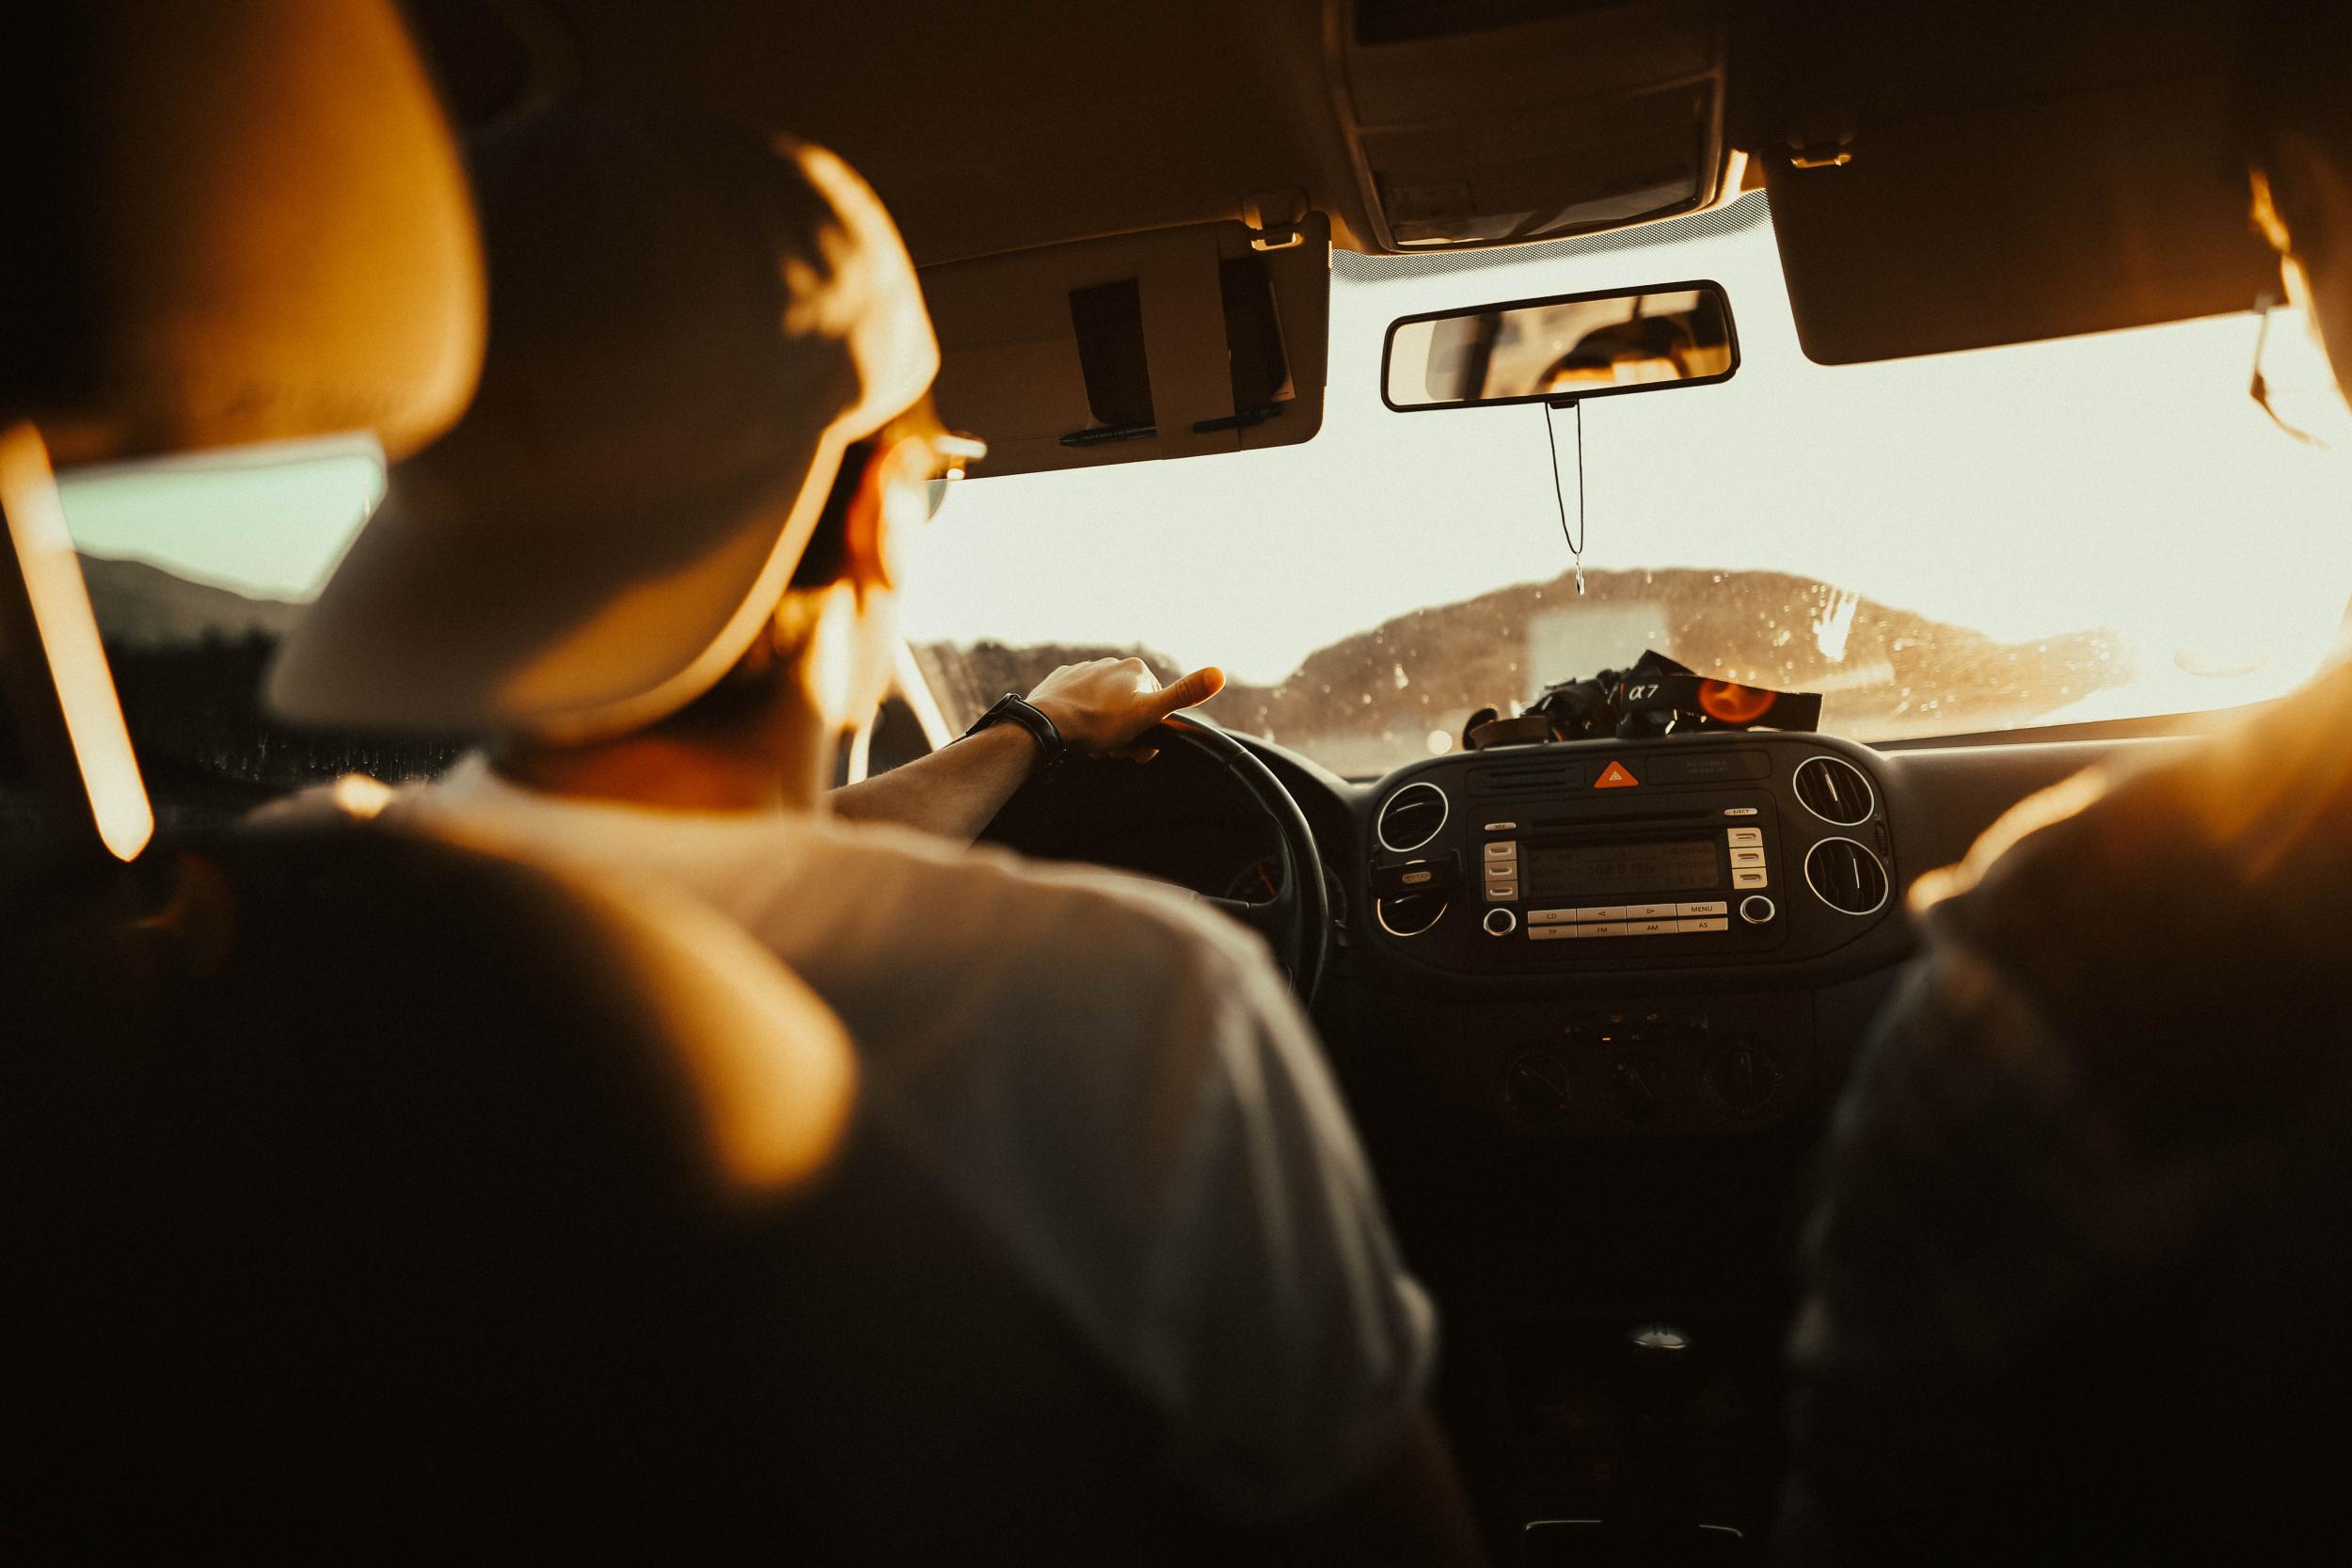 Southern Road Trip playlist by Butler Auto Group encourages road safety